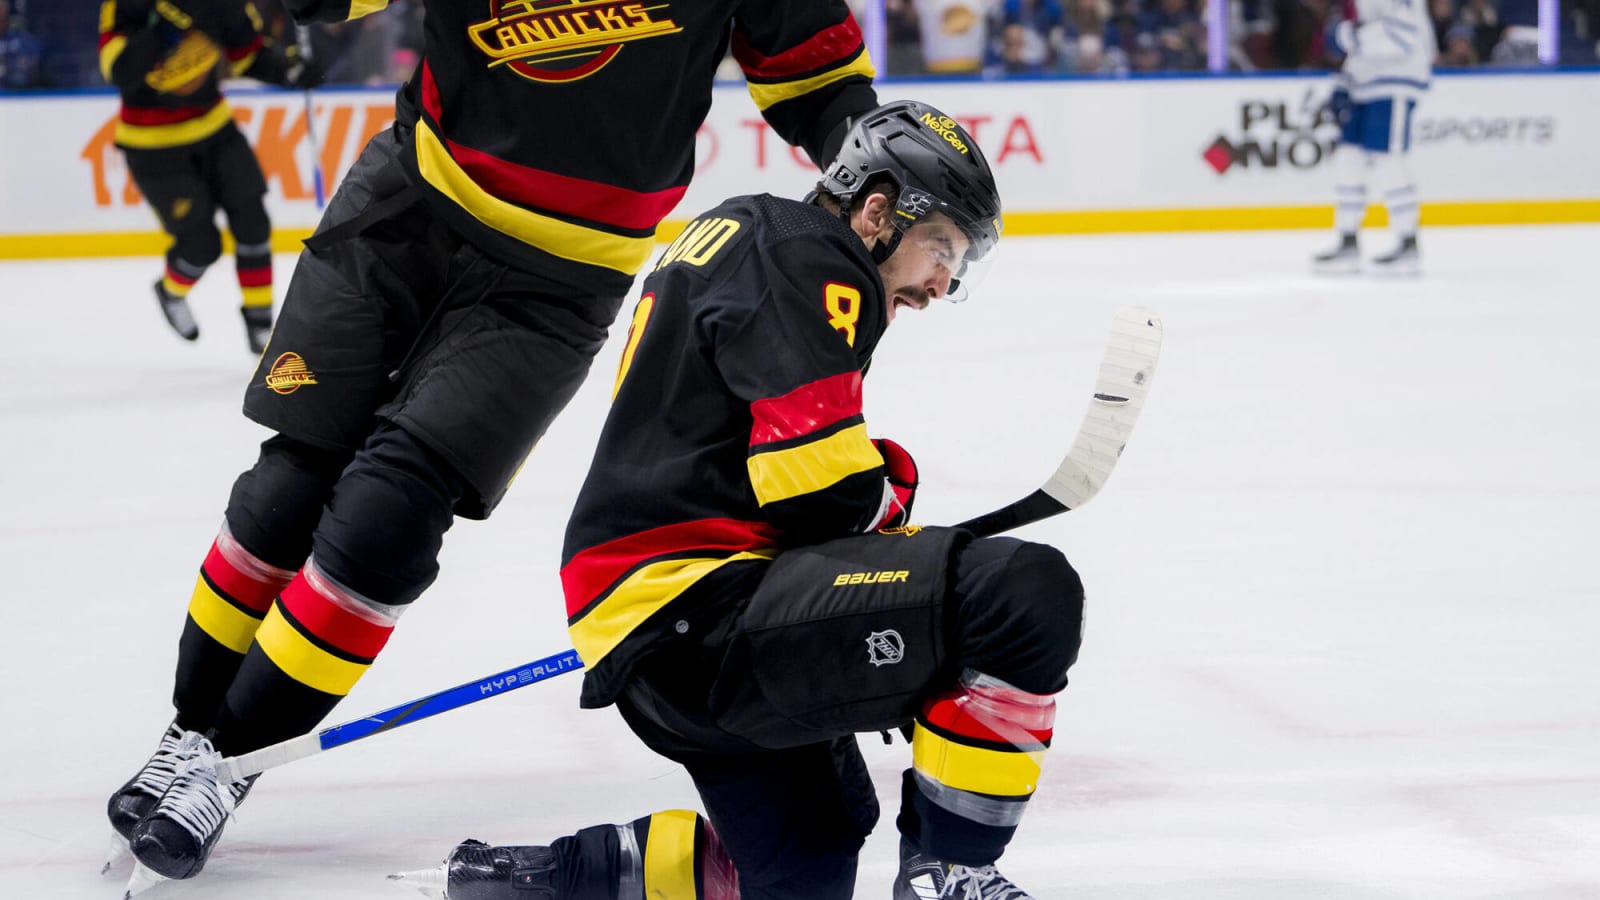 Vancouver Canucks’ 3 stars of the week: J.T. Miller, Quinn Hughes and Conor Garland all hit career milestones